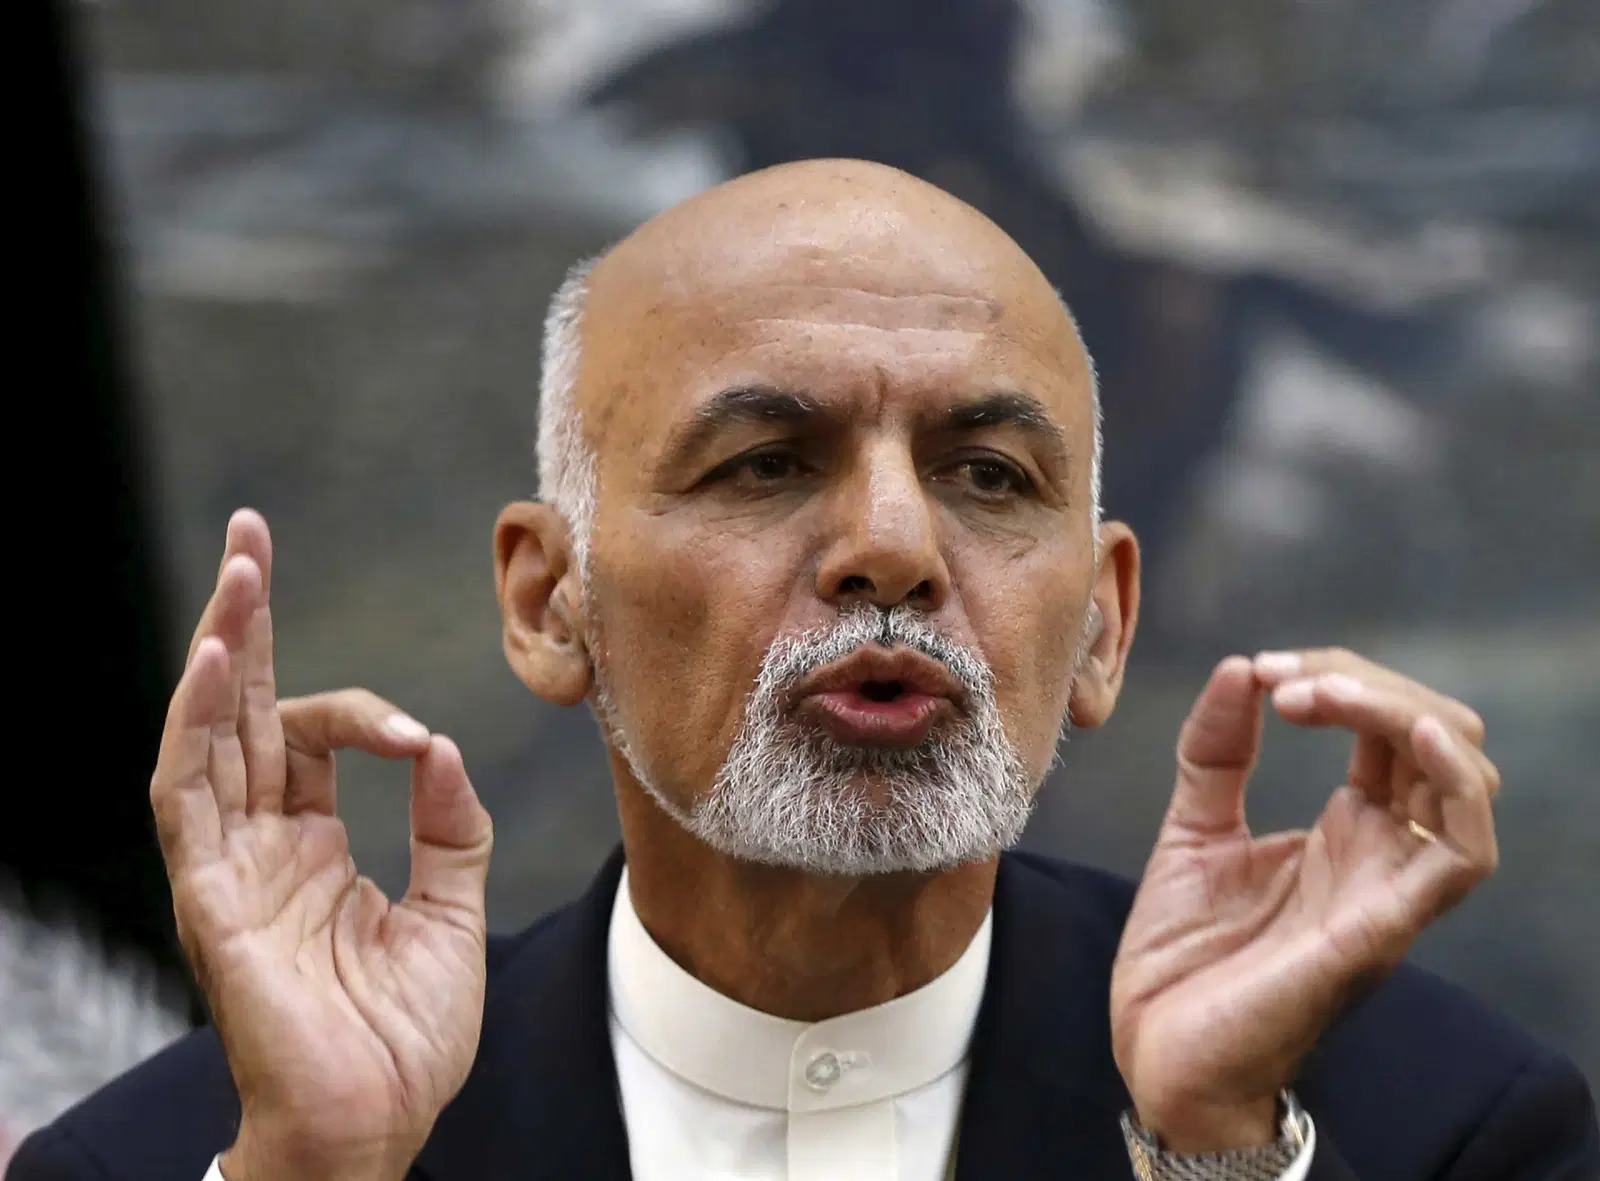 Russian embassy official says President Ghani left with cars, helicopter full of cash